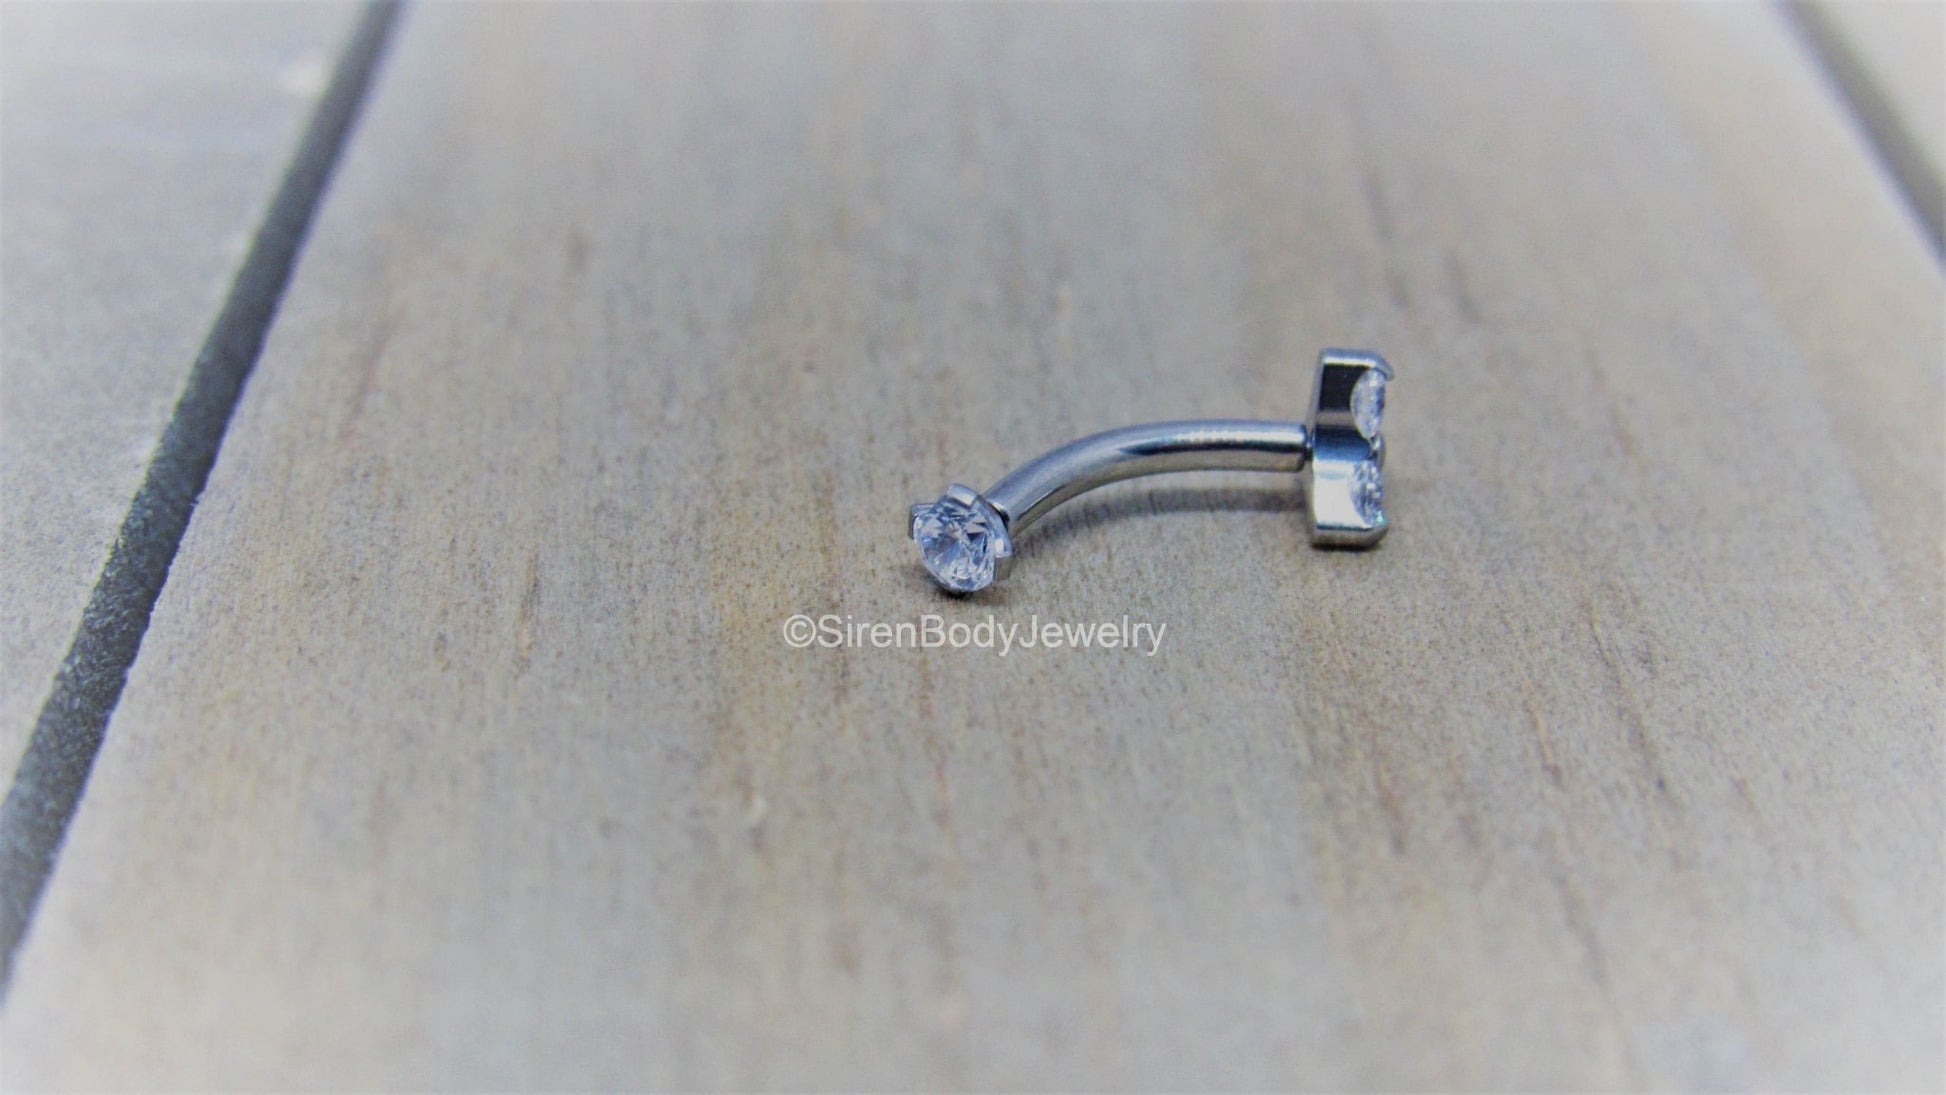 Rook piercing cluster curved barbell 16g vertical labret bar internally threaded titanium - SirenBodyJewelry